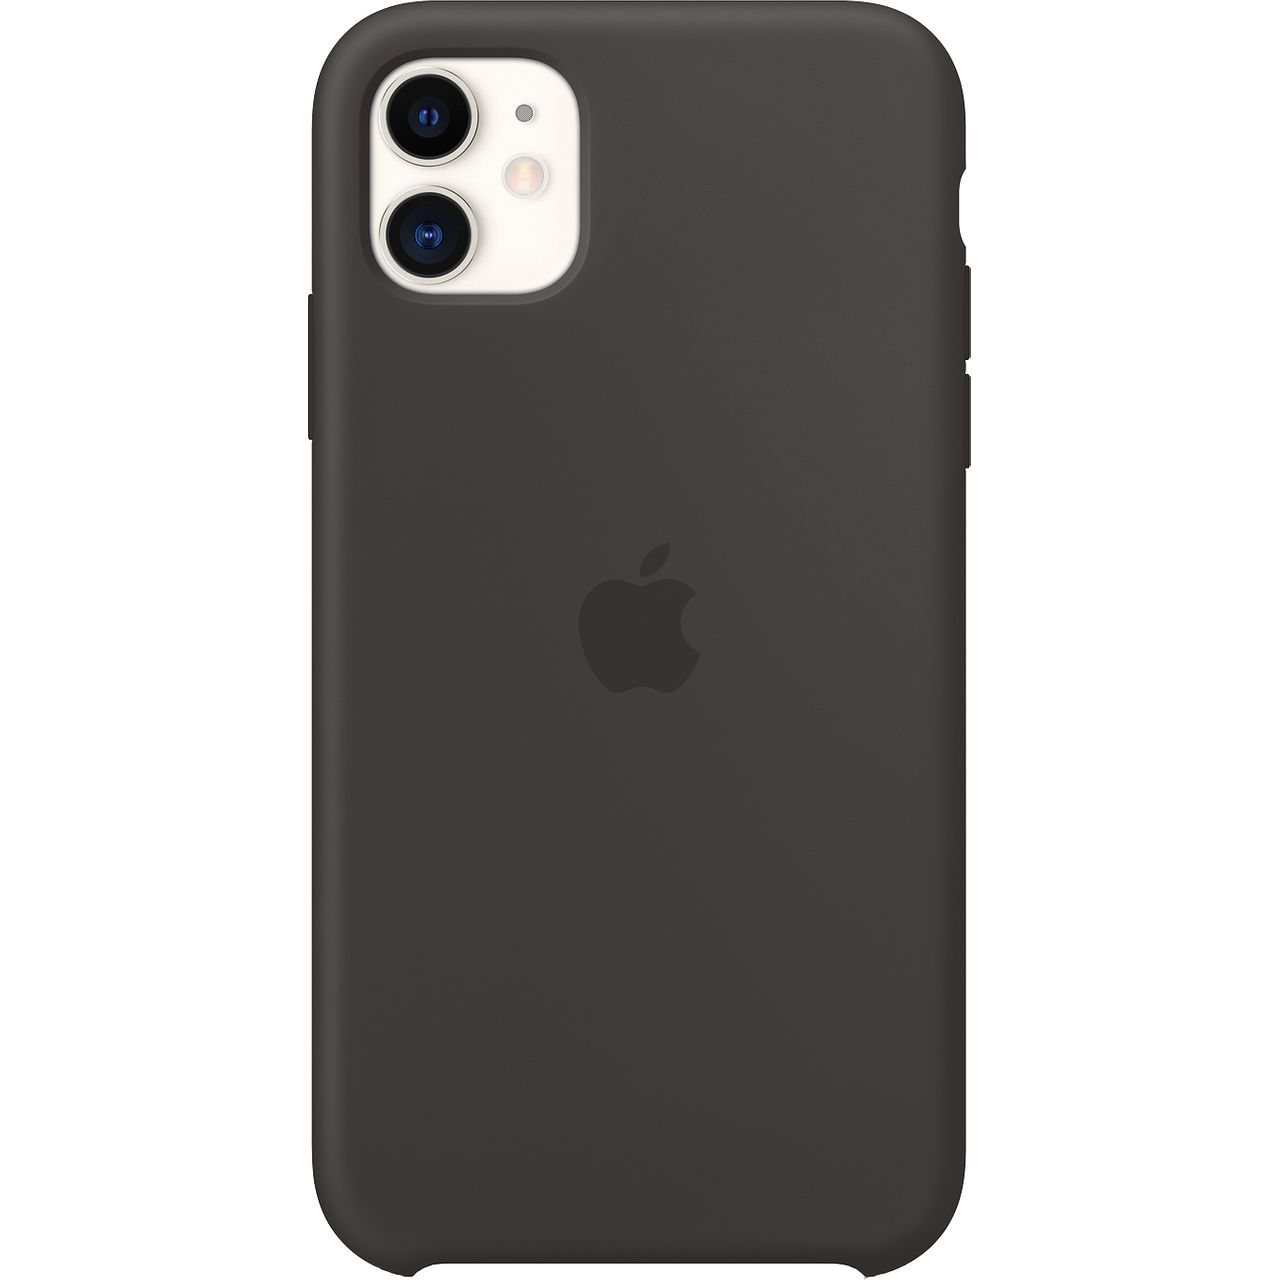 Apple iPhone 11 Silicone Case Review